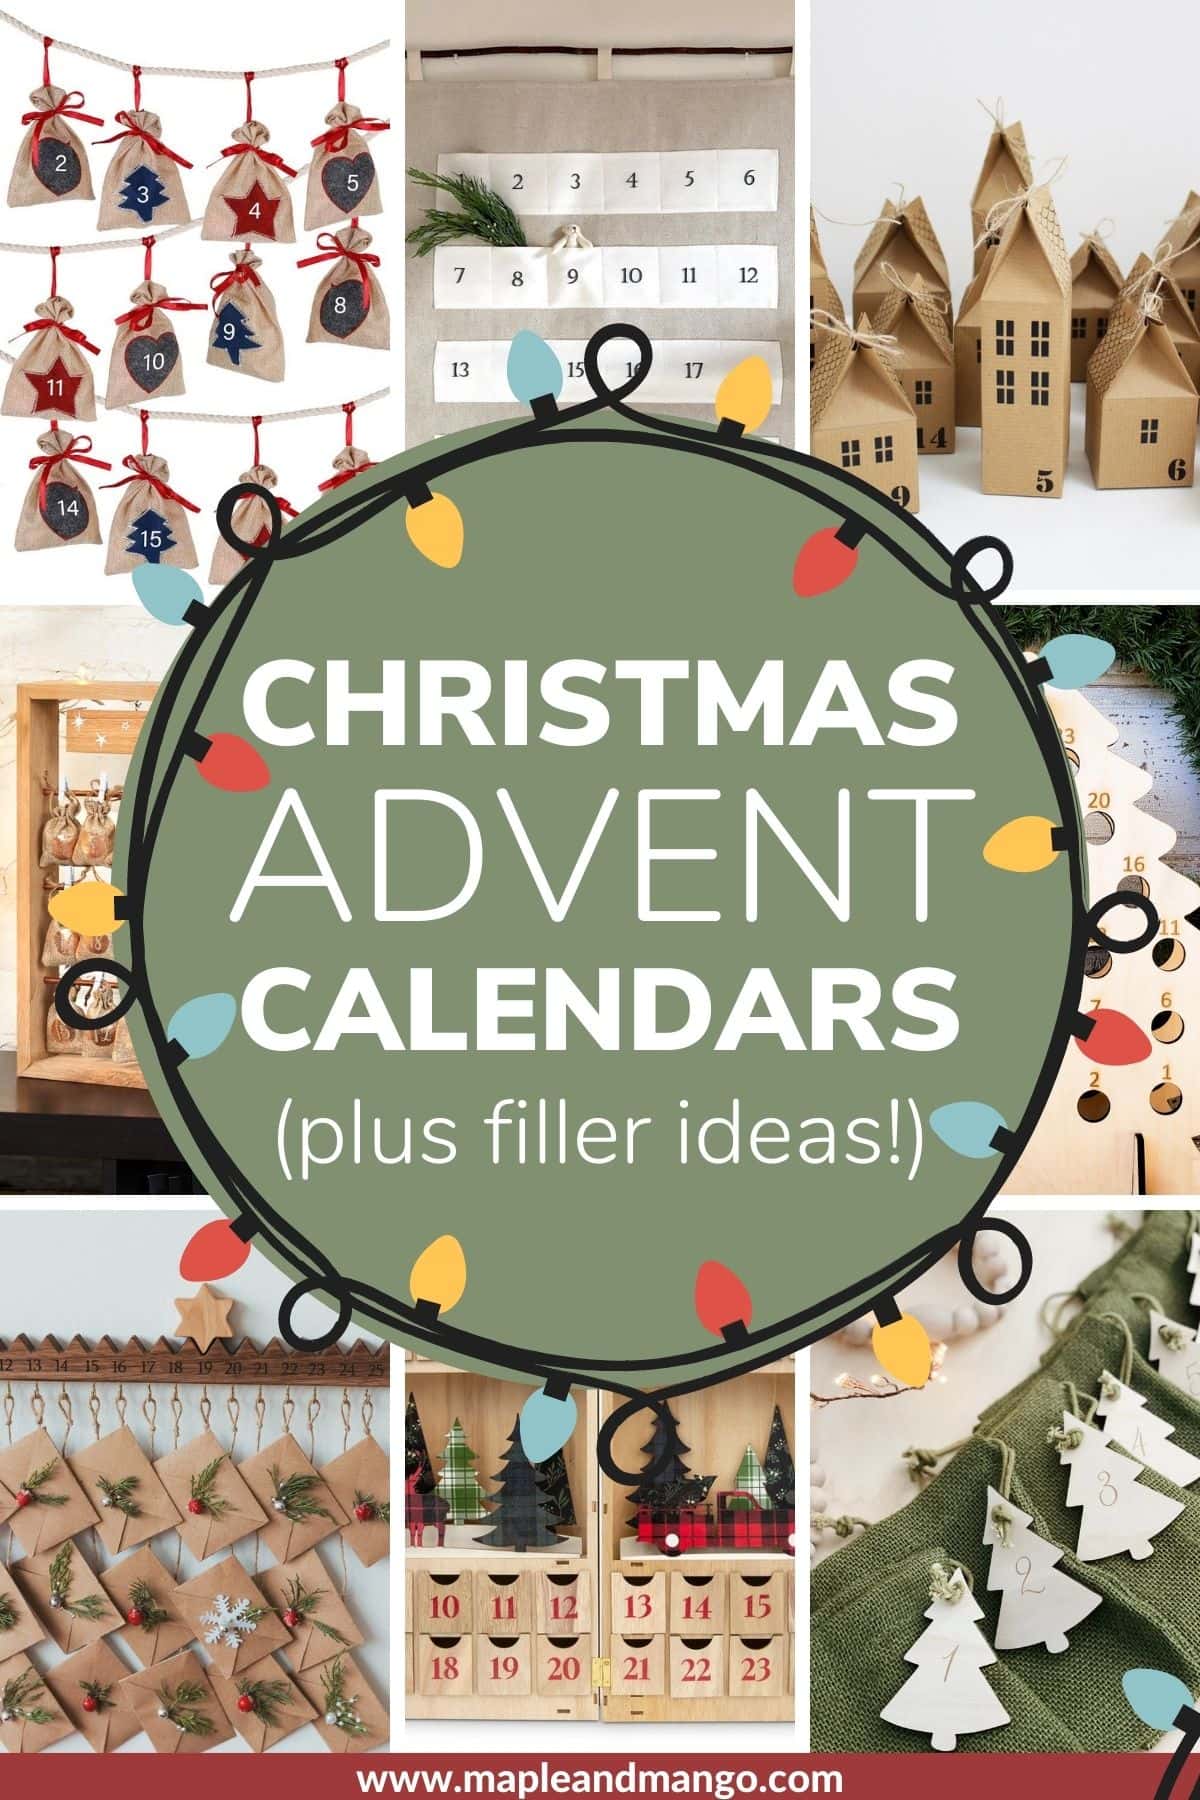 Pinterest collage graphic of advent calendars with text overlay "Christmas Advent Calendars Plus Filler Ideas".